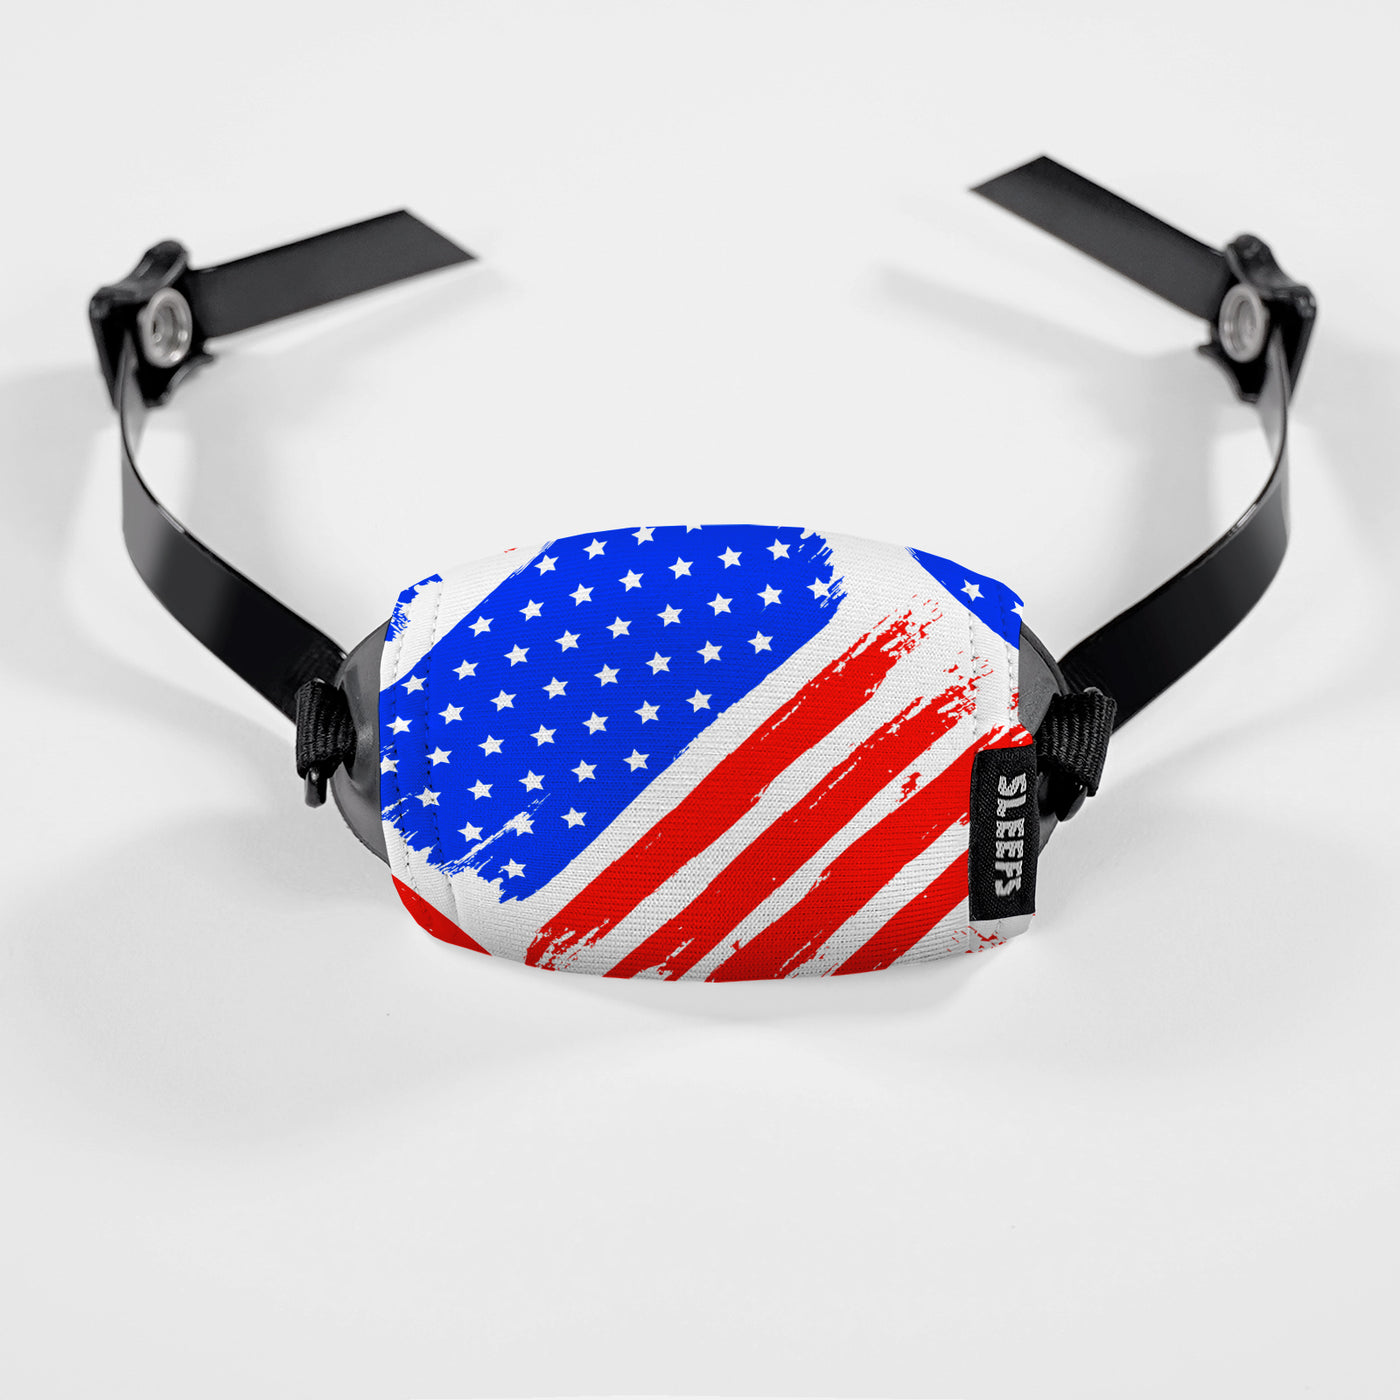 USA Brushed Flag Chin Strap Cover